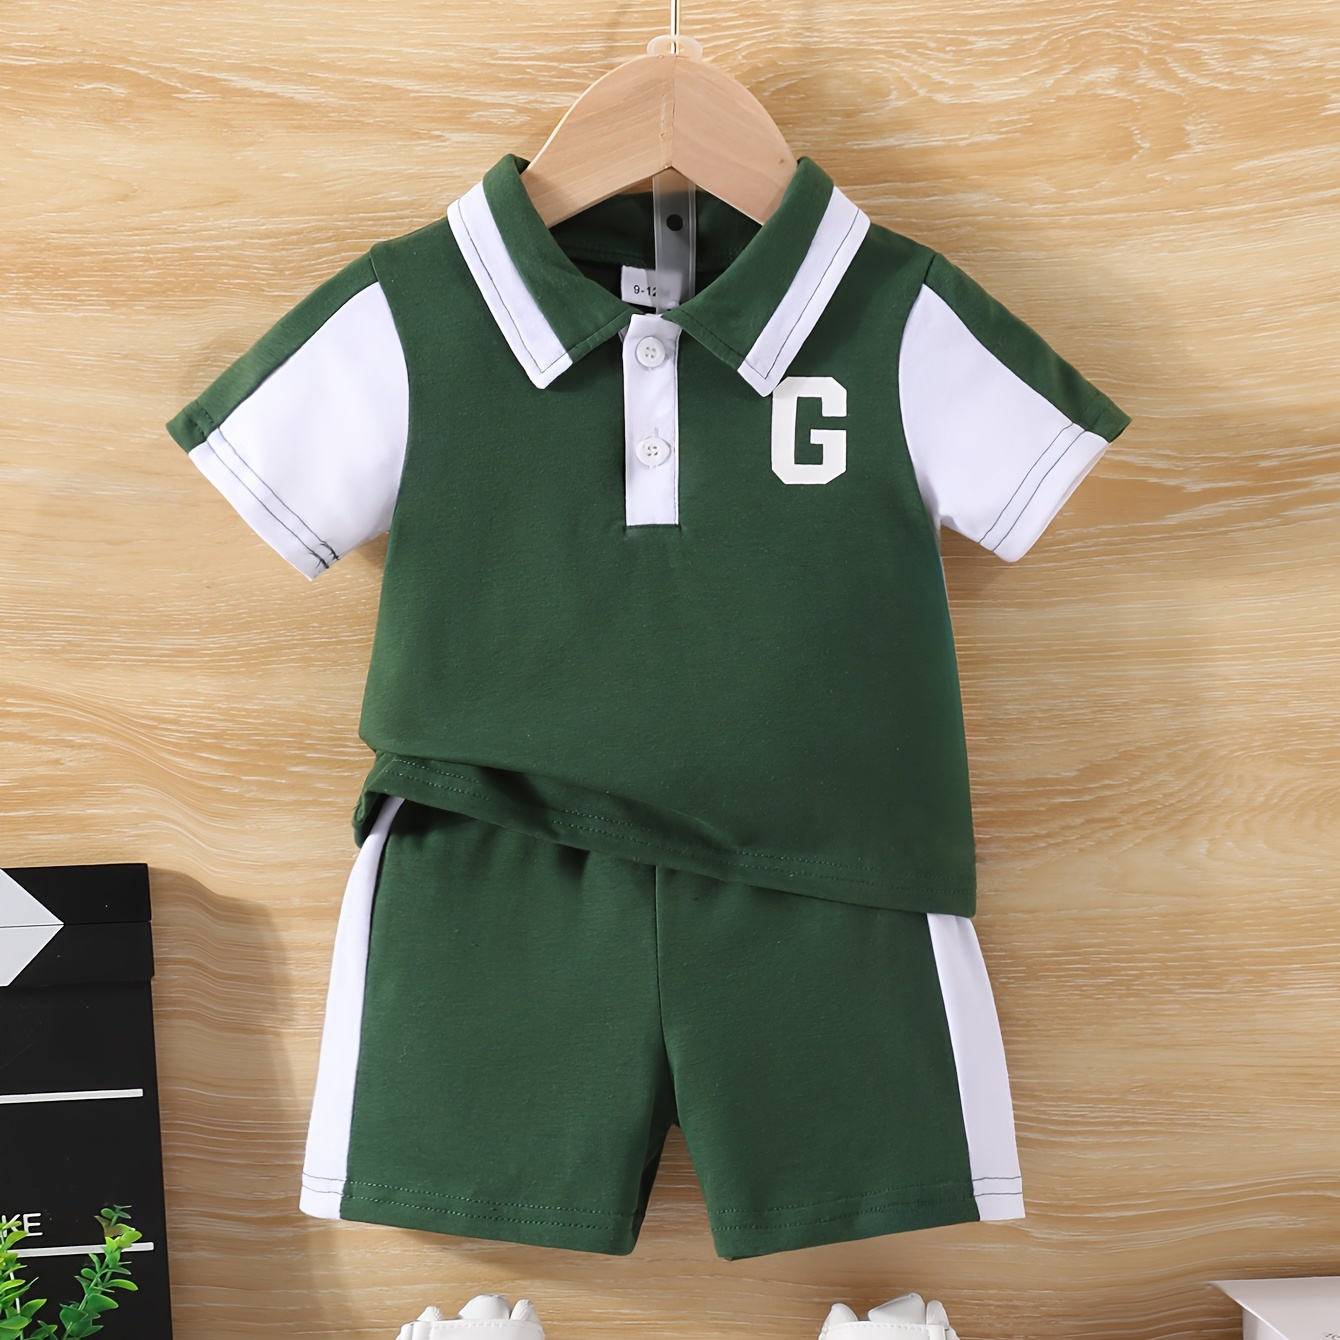 

Toddler Boys Summer Cotton Outfit, 2-piece Set With Letter Print Sports Turn-down Collar Shirt & Contrast Color Casual Shorts, Preppy Style, Green & White